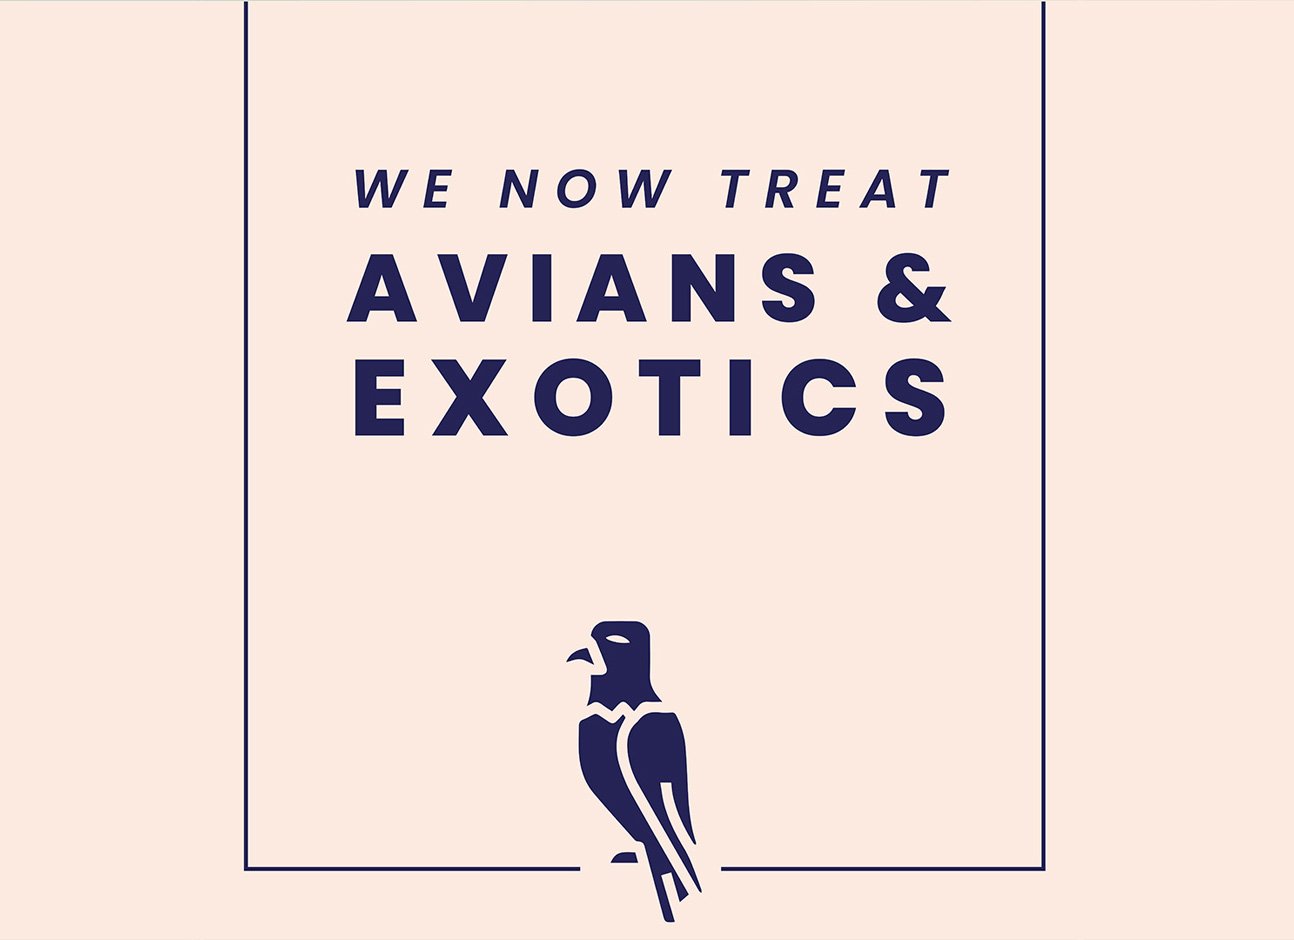 The Avian and Exotic Service at Modern Vet is now fully operational.